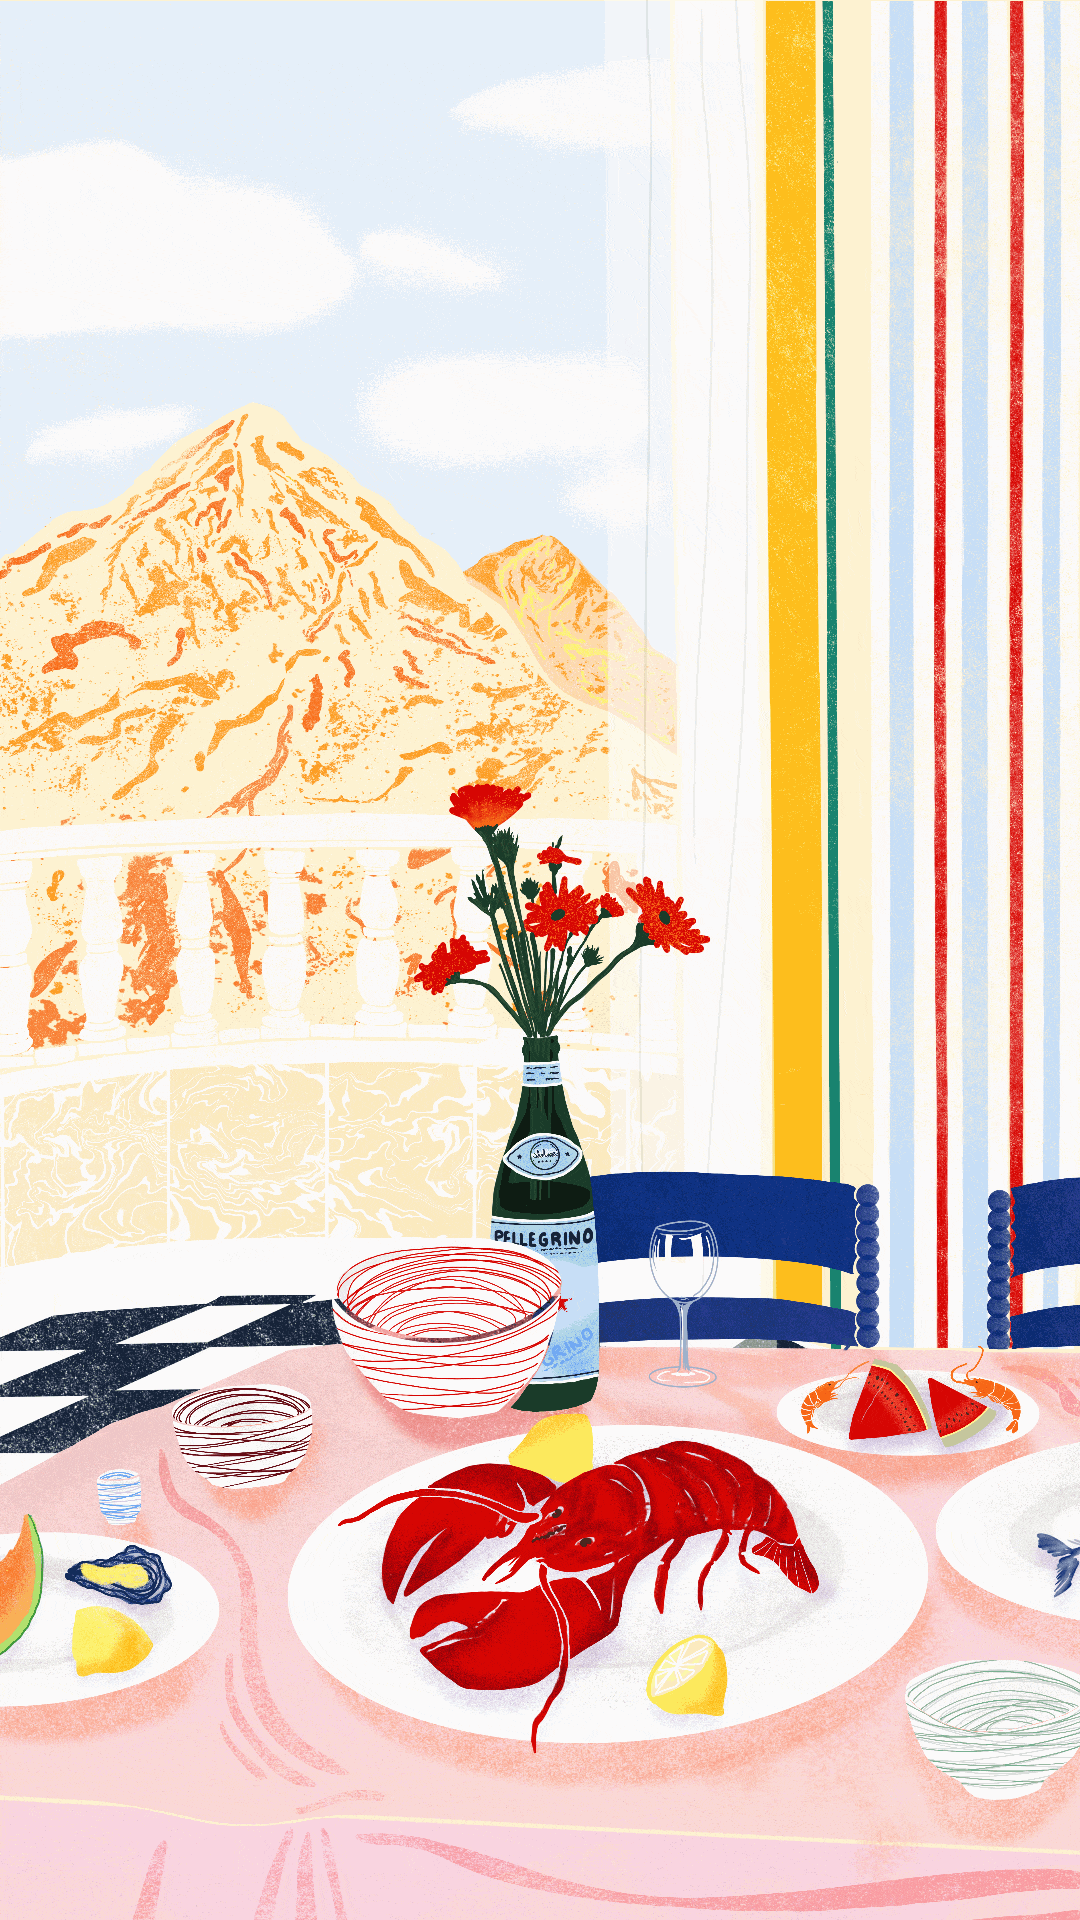 Still life of a lobster lunch in the Italian mountains